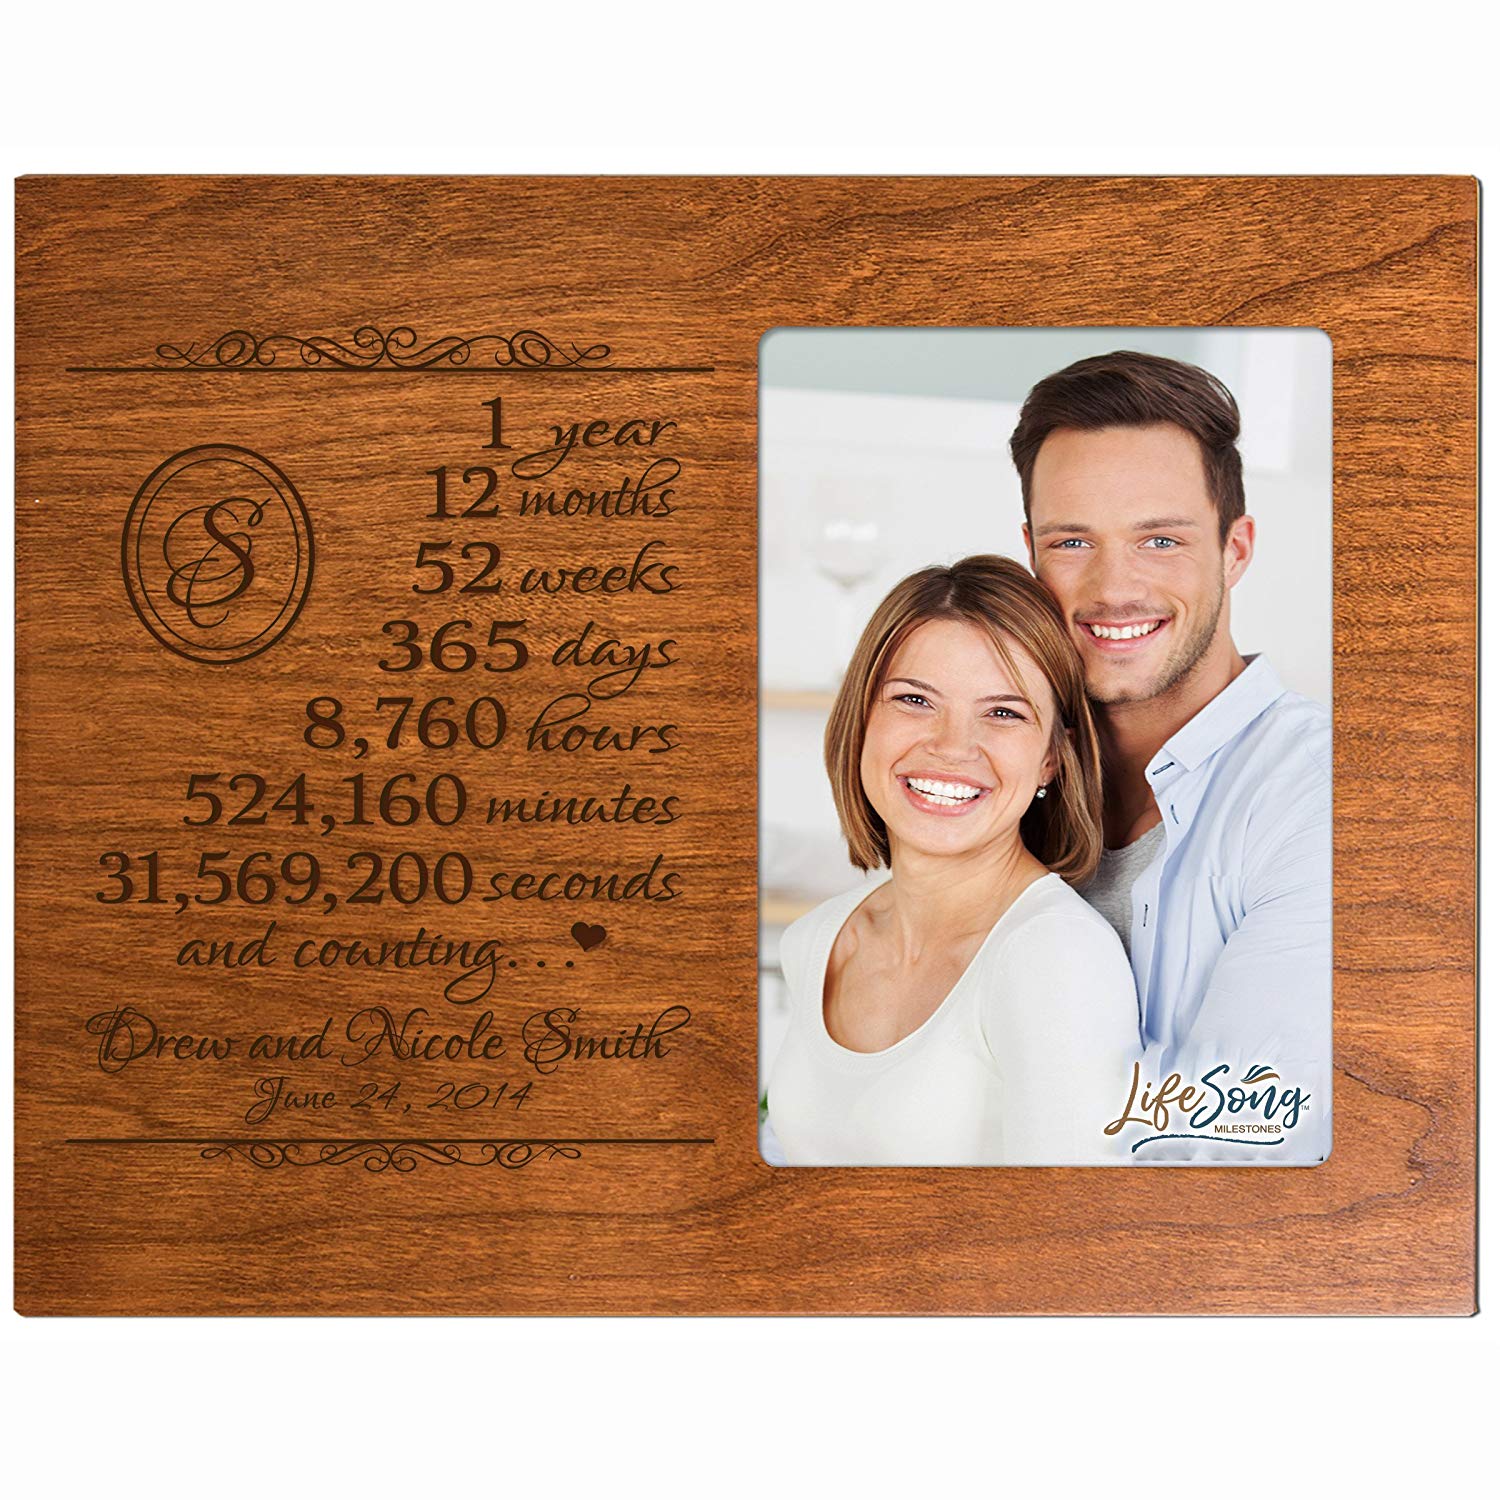 Personalized Picture Frame 1st Wedding Anniversary Gift for Parents